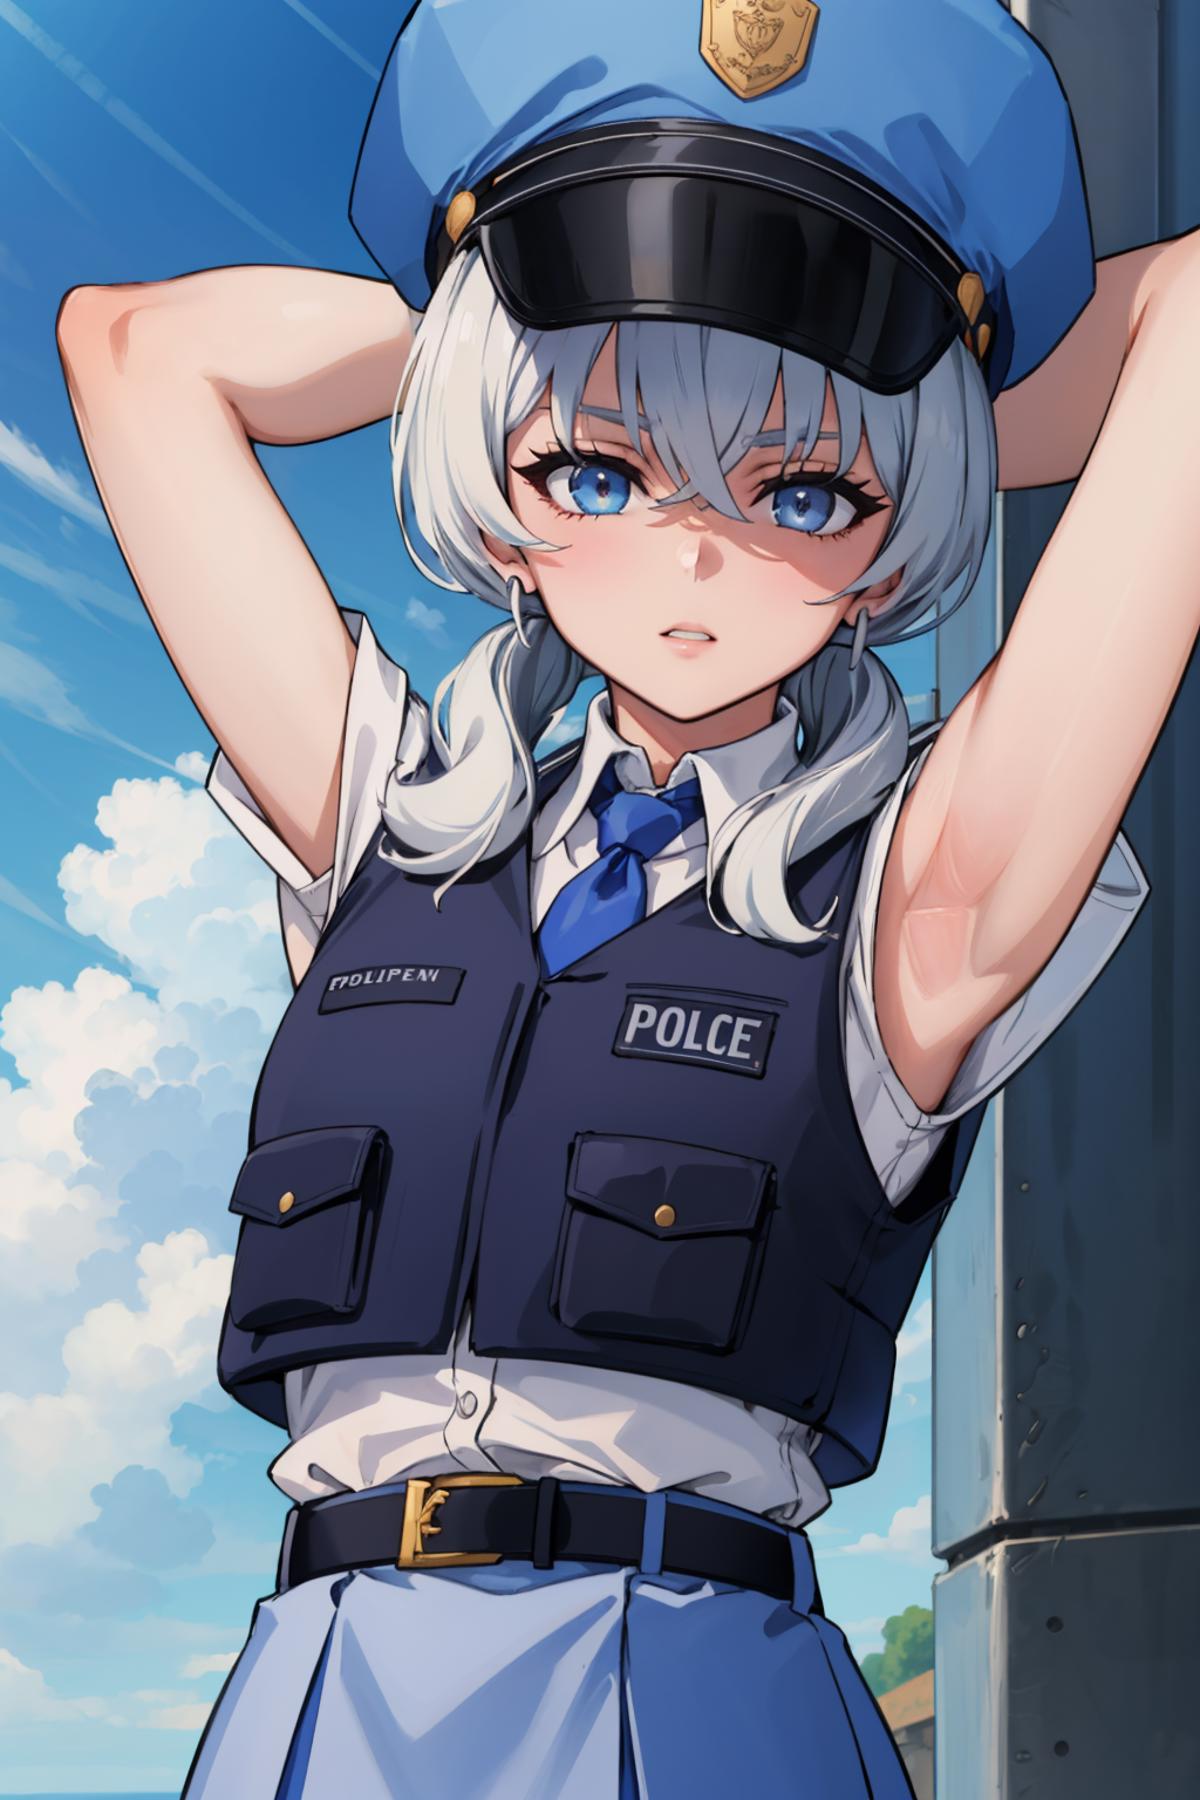 Valkyrie Police Academy Student | Blue Archive image by novowels